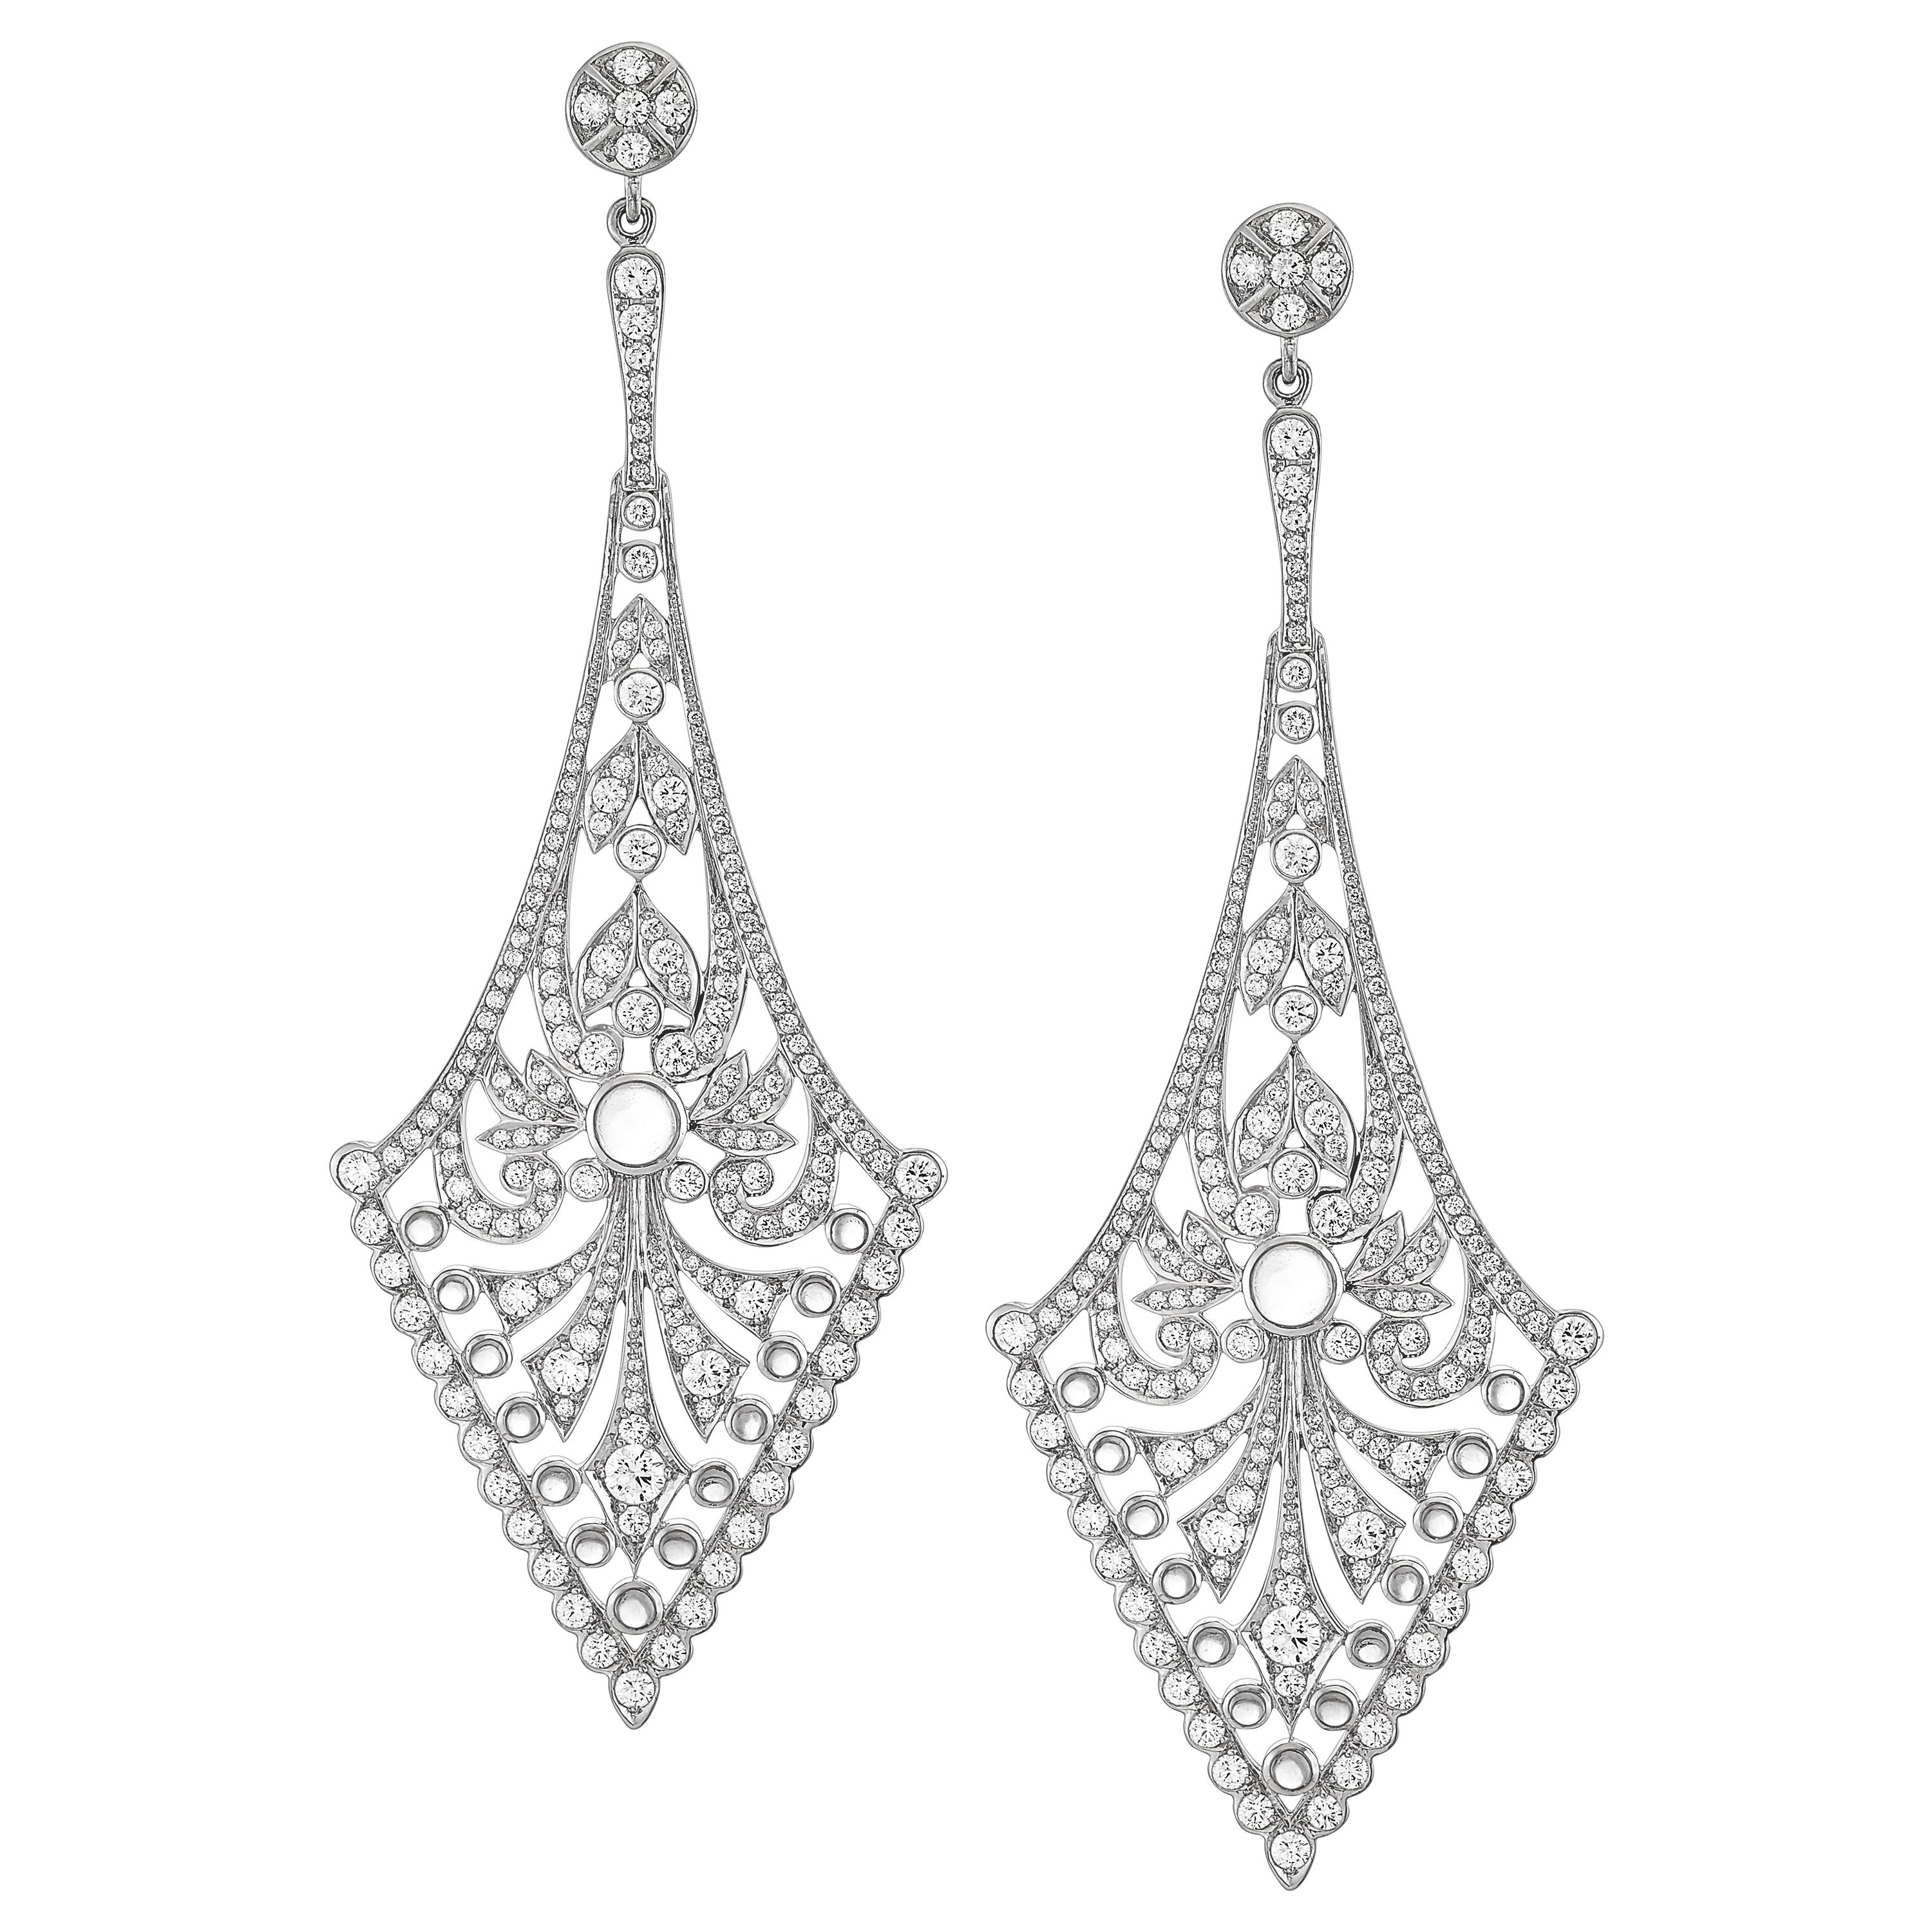 4.2 Carat Diamond Pave' and Moonstone Earrings in 18 Karat White Gold